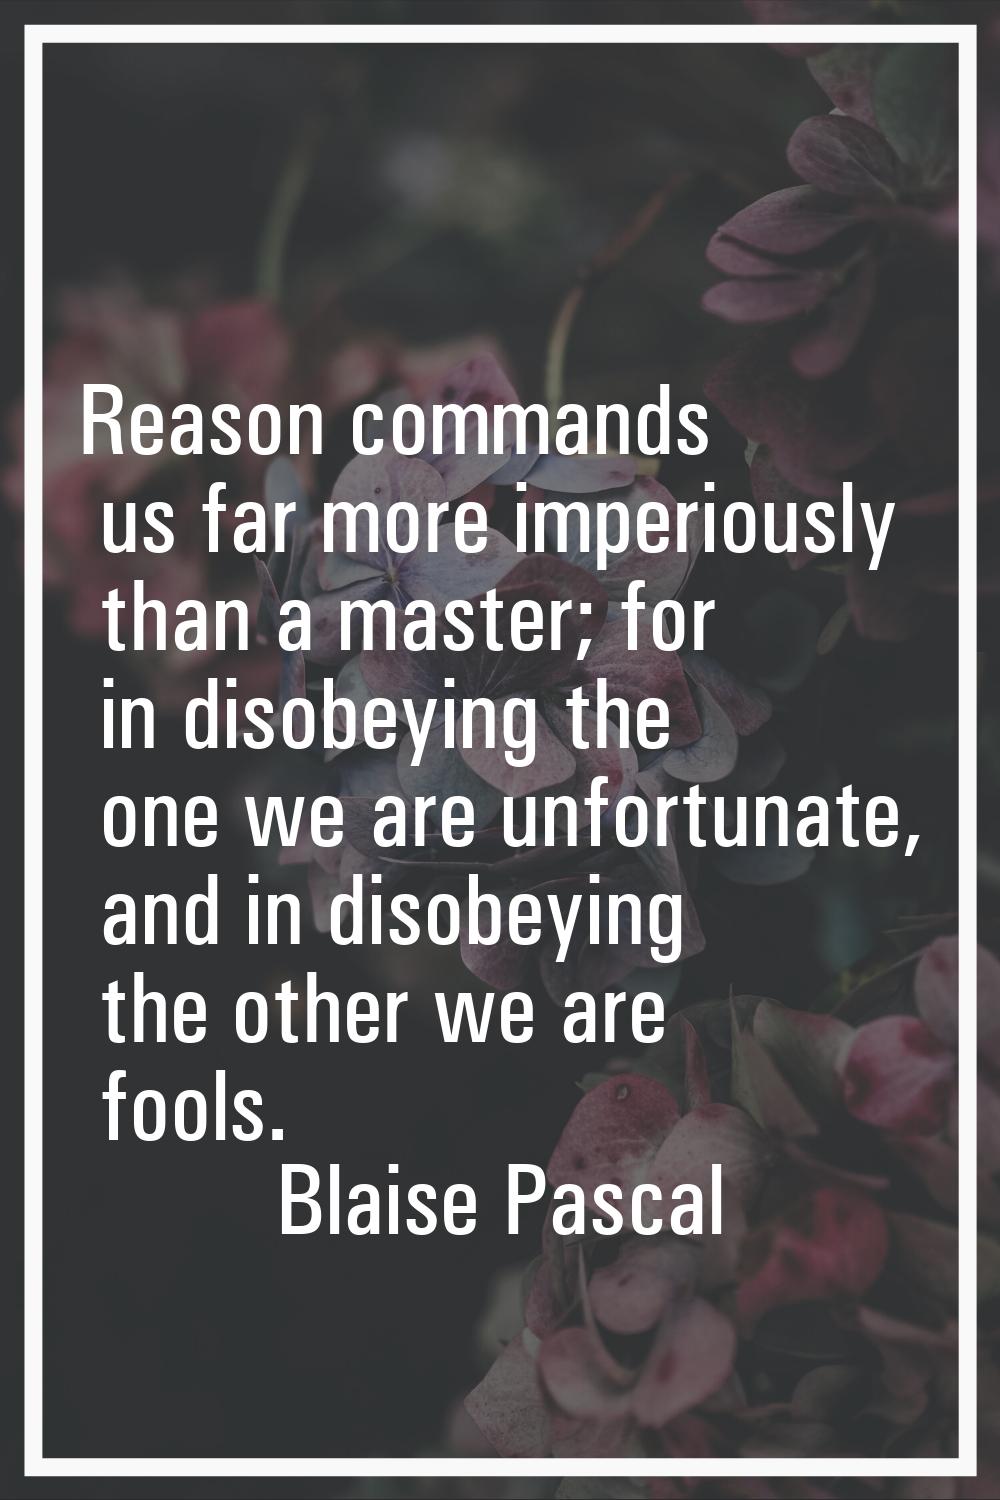 Reason commands us far more imperiously than a master; for in disobeying the one we are unfortunate